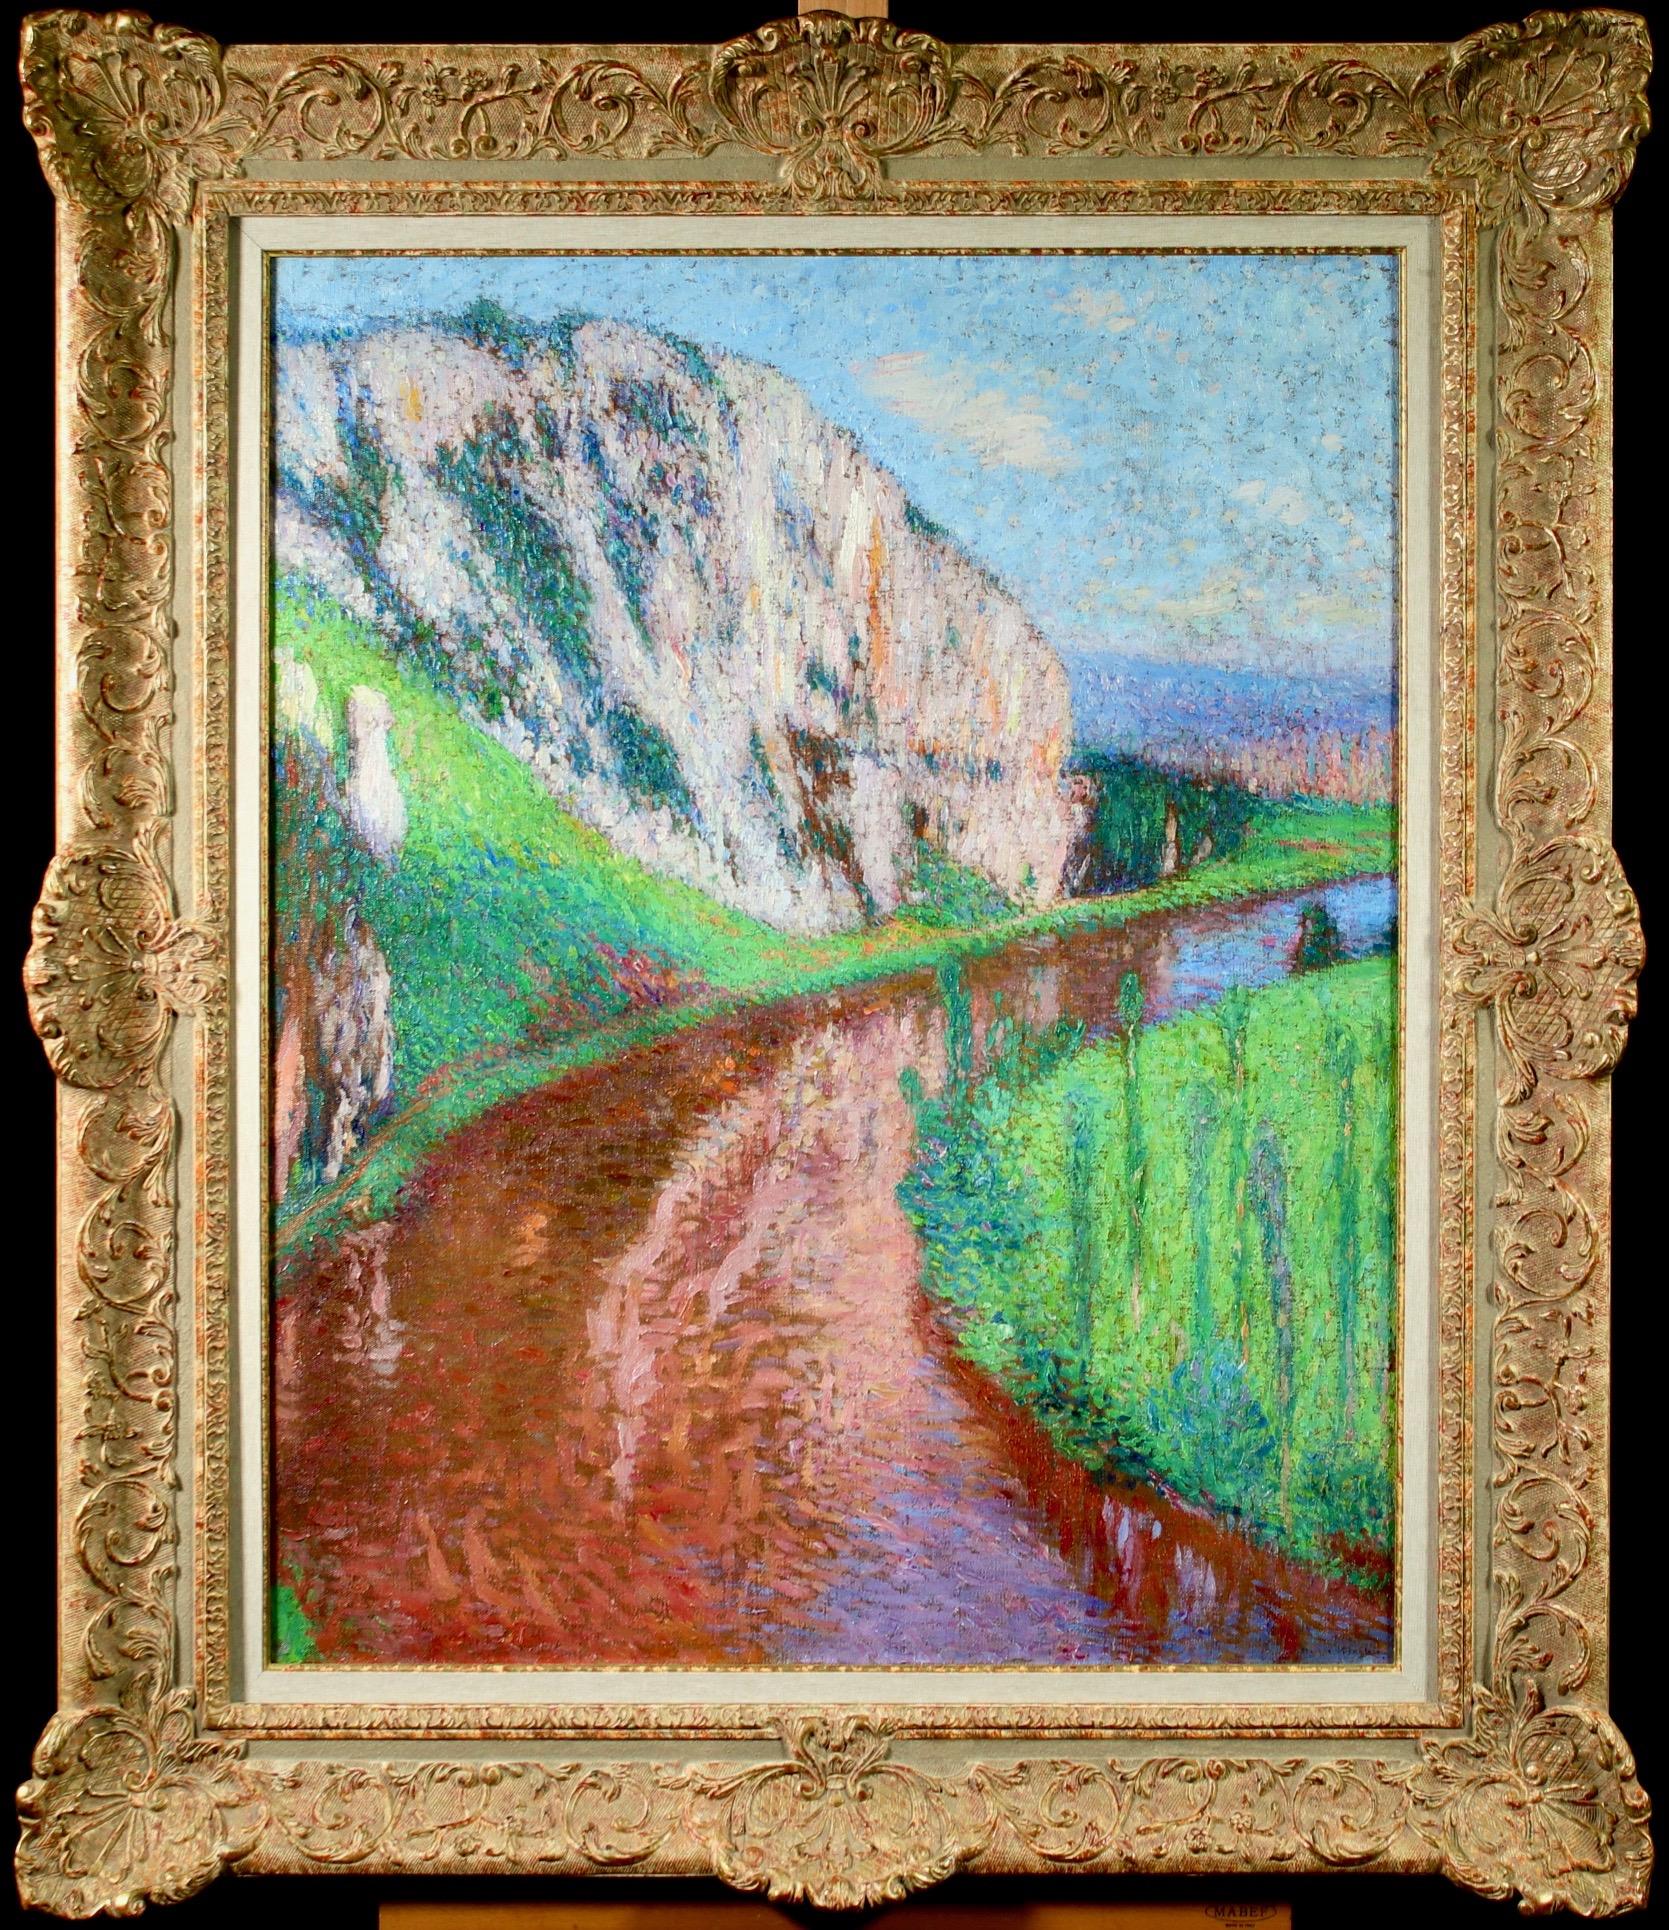 A breathtaking pointillist oil on canvas circa 1930 by Henri Martin depicting a landscape with a river flowing below the Cliffs of Saint Cirq Lapopie in South-West France. Signed lower right.

The authenticity of this work has been confirmed by